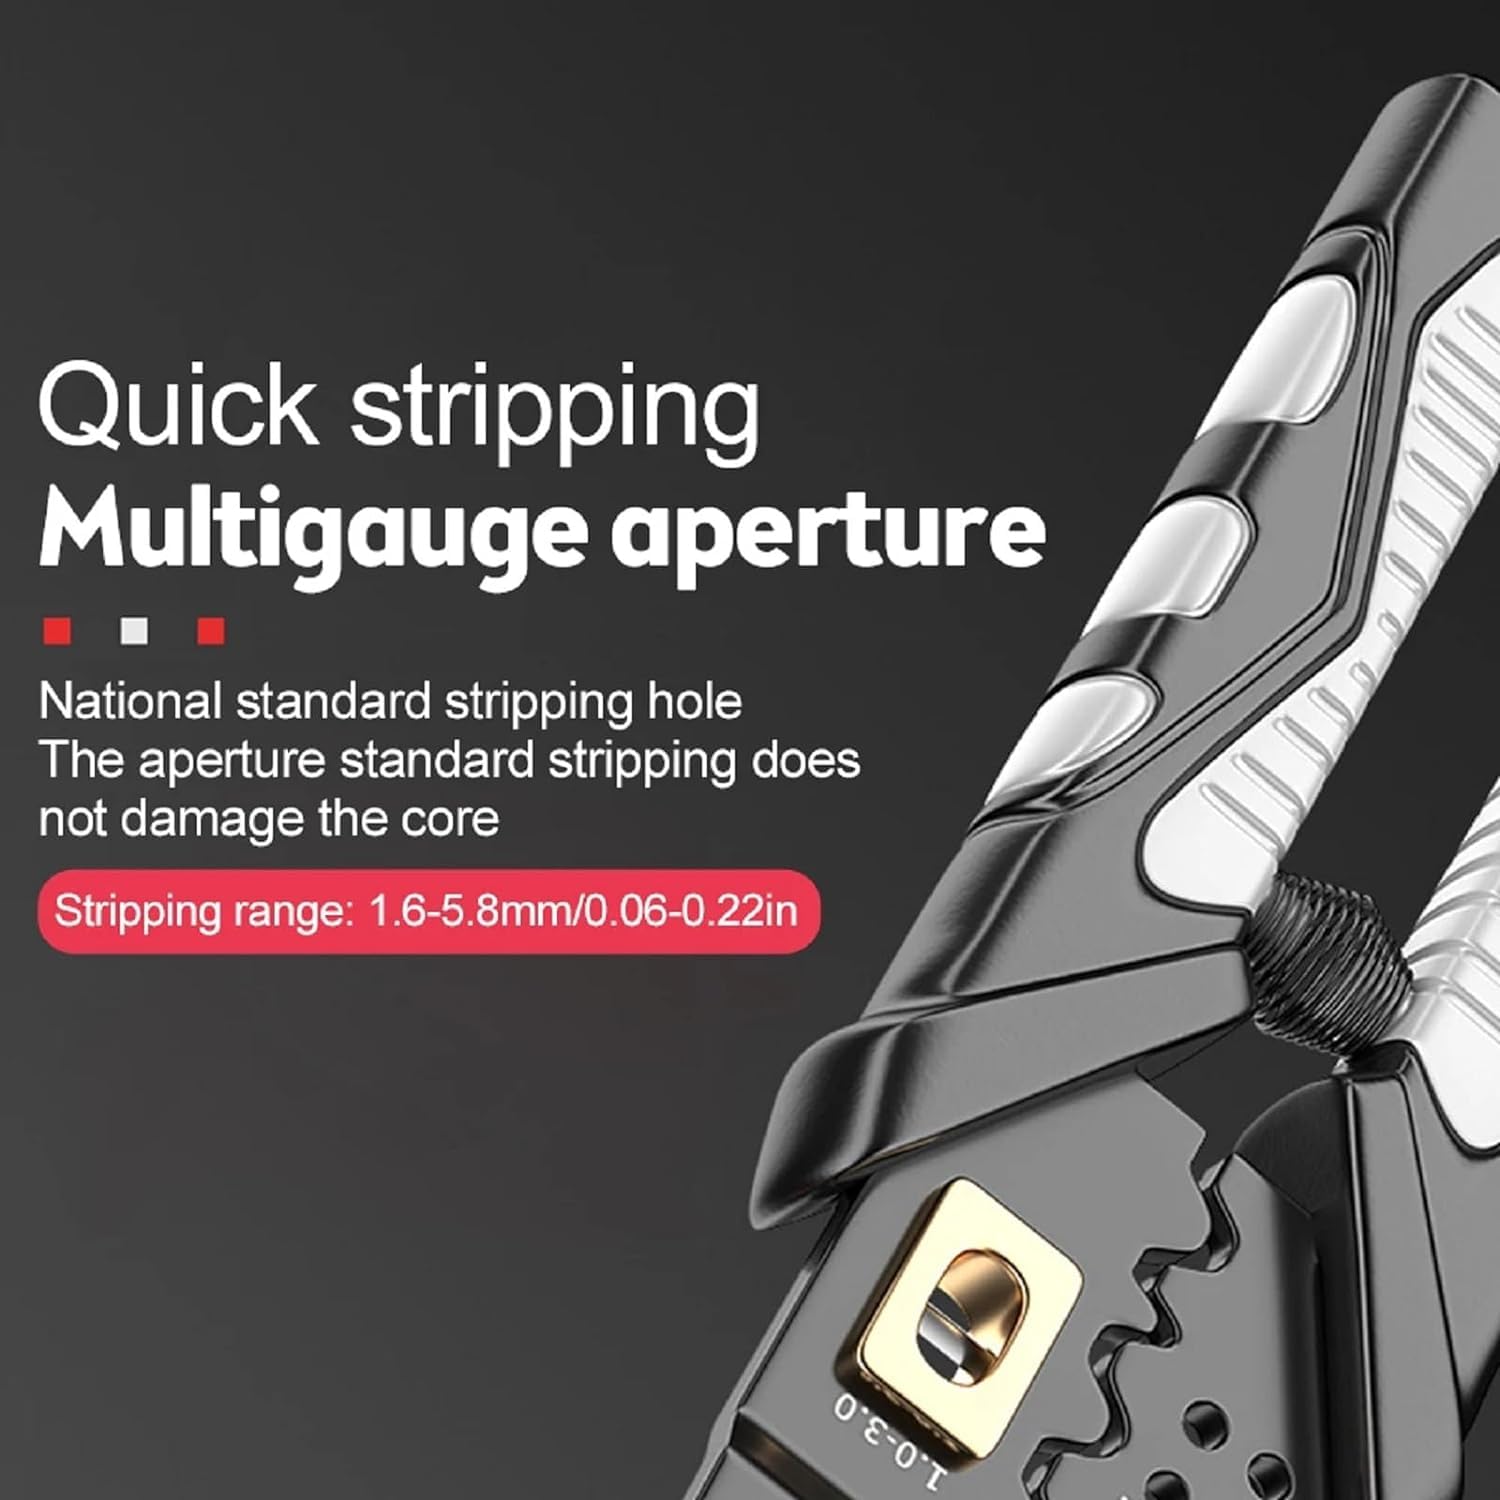 25-in-1 Multi-Functional Wire Stripper and Electrician Tool Chrome Vanadium Steel Pliers for Splitting, Breaking, Separating, Terminal Crimping, Stripping, Cable Cutting, Winding, and Clamping